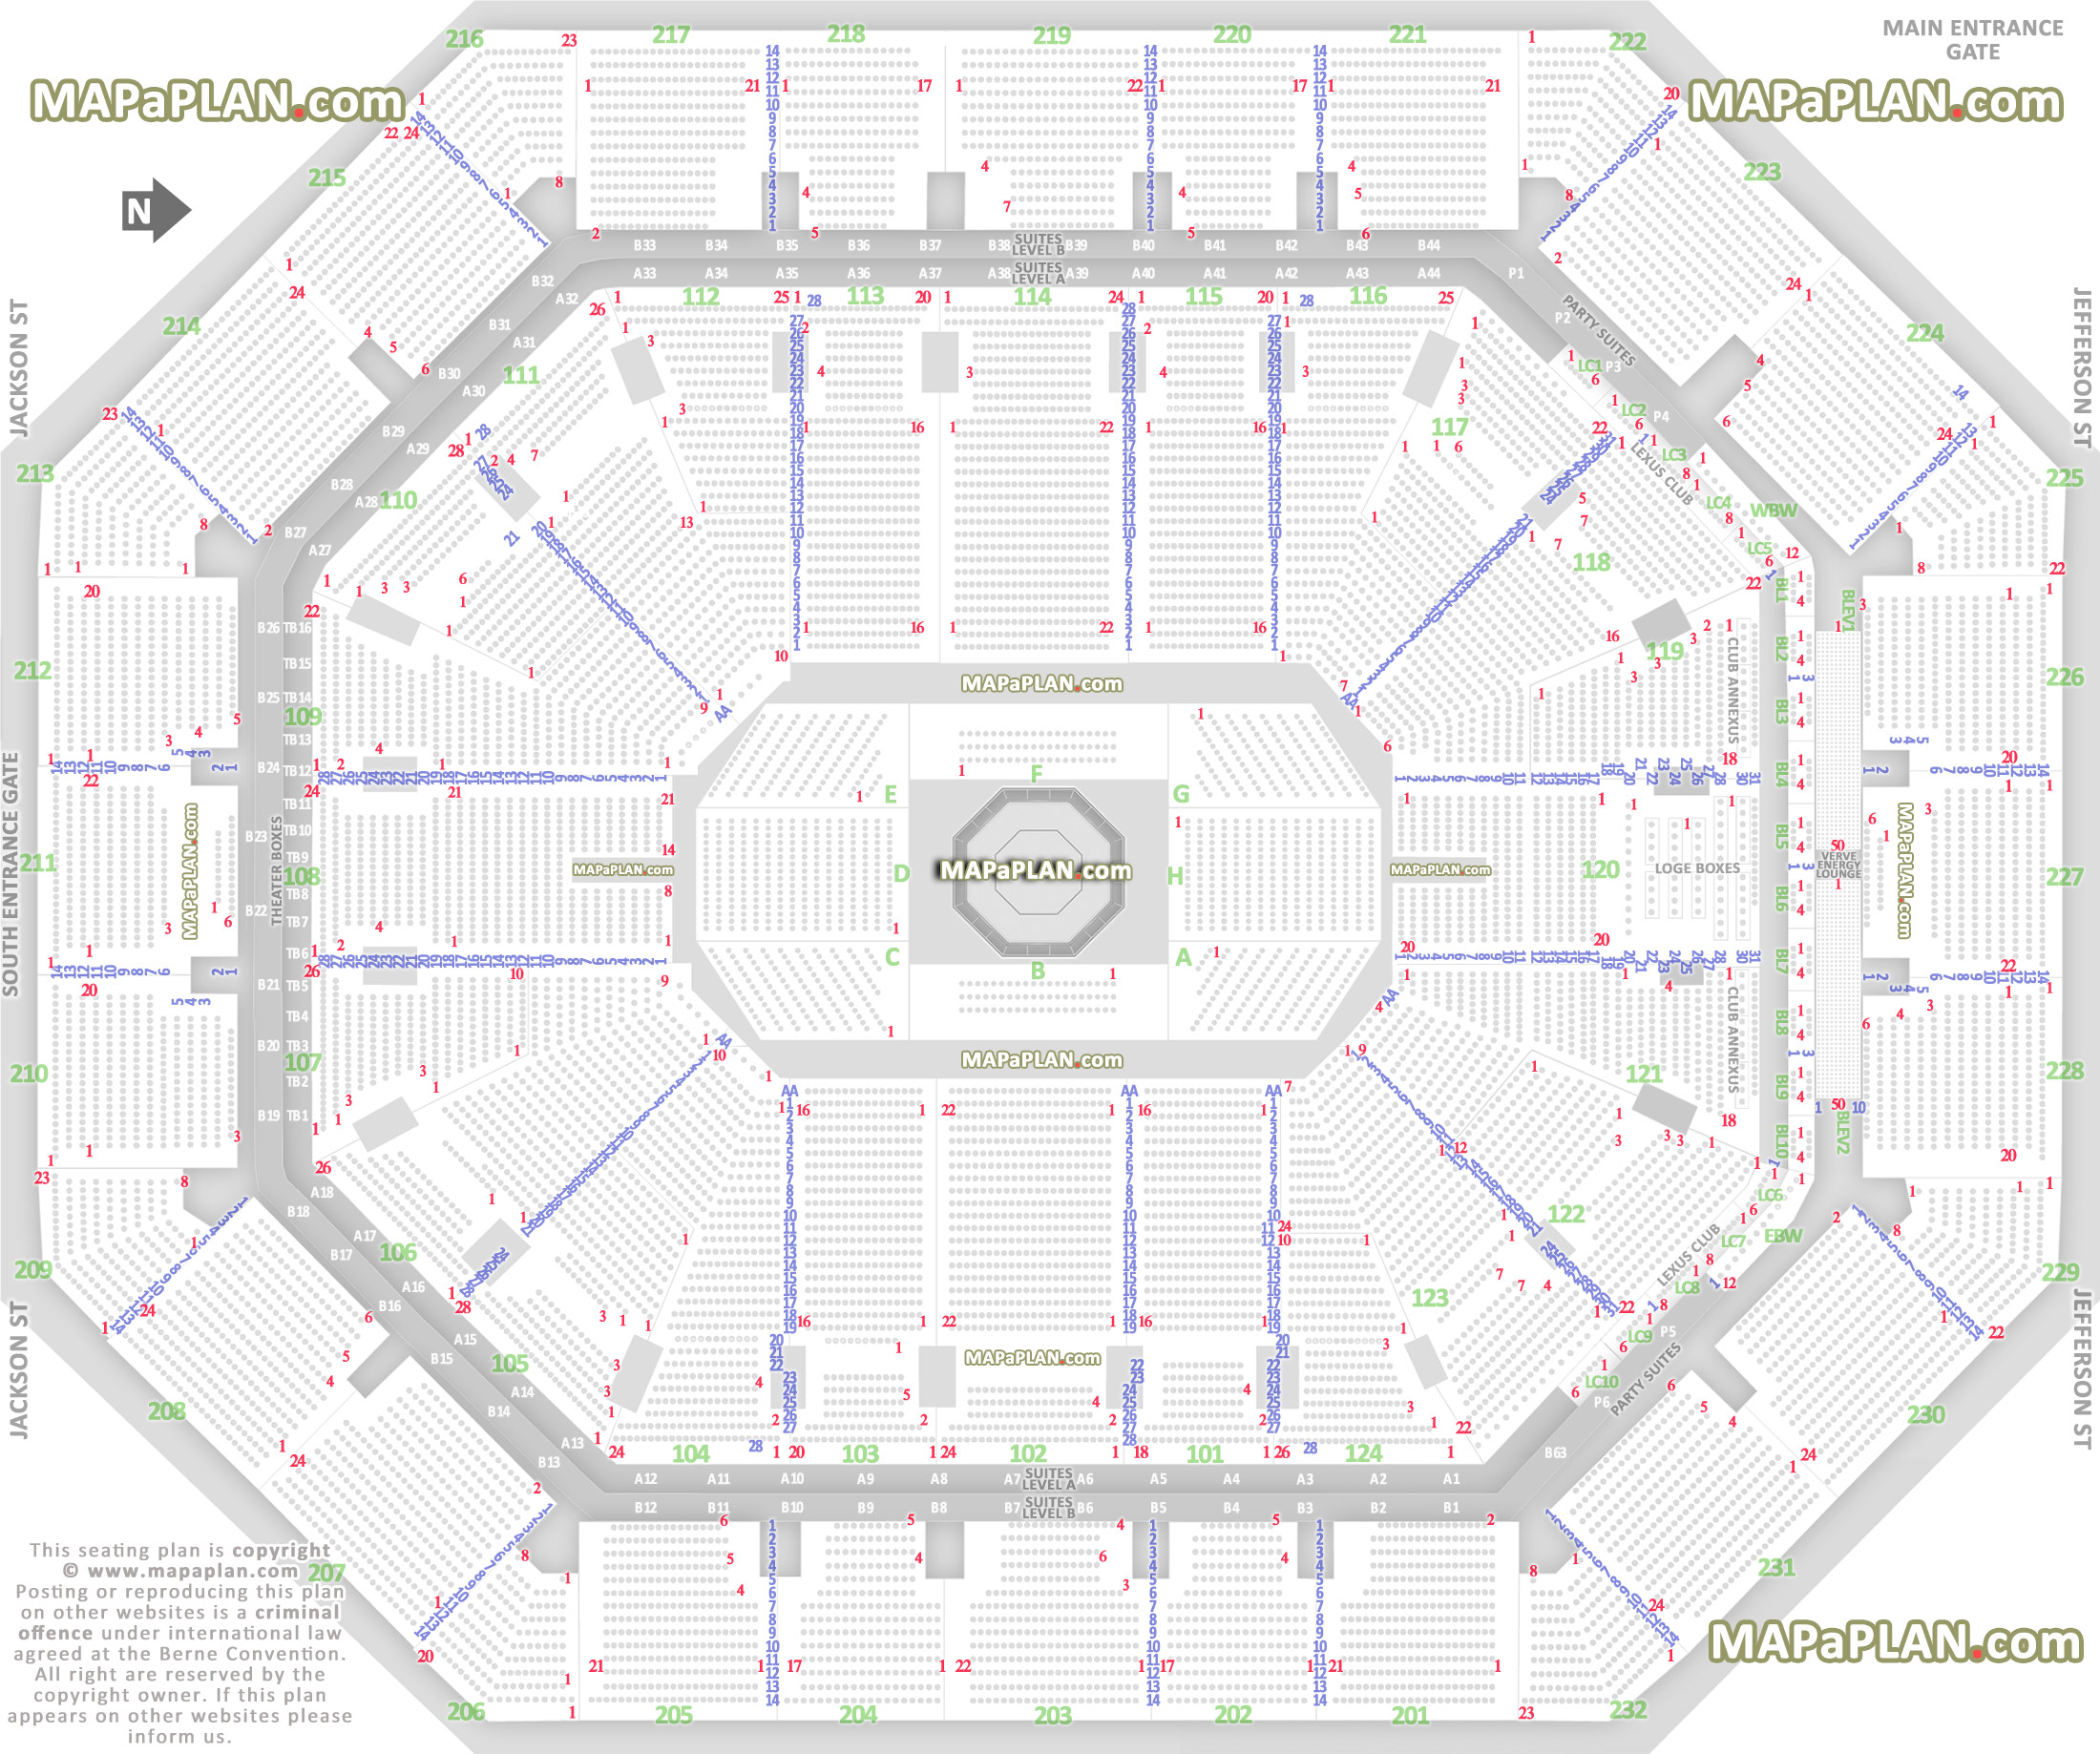 ufc mma fights fully seated setup chart viewer main entrance gates exit detailed map wheelchair disabled handicap accessible executive hospitality rental suites seat theater box Phoenix Footprint Center Arena seating chart